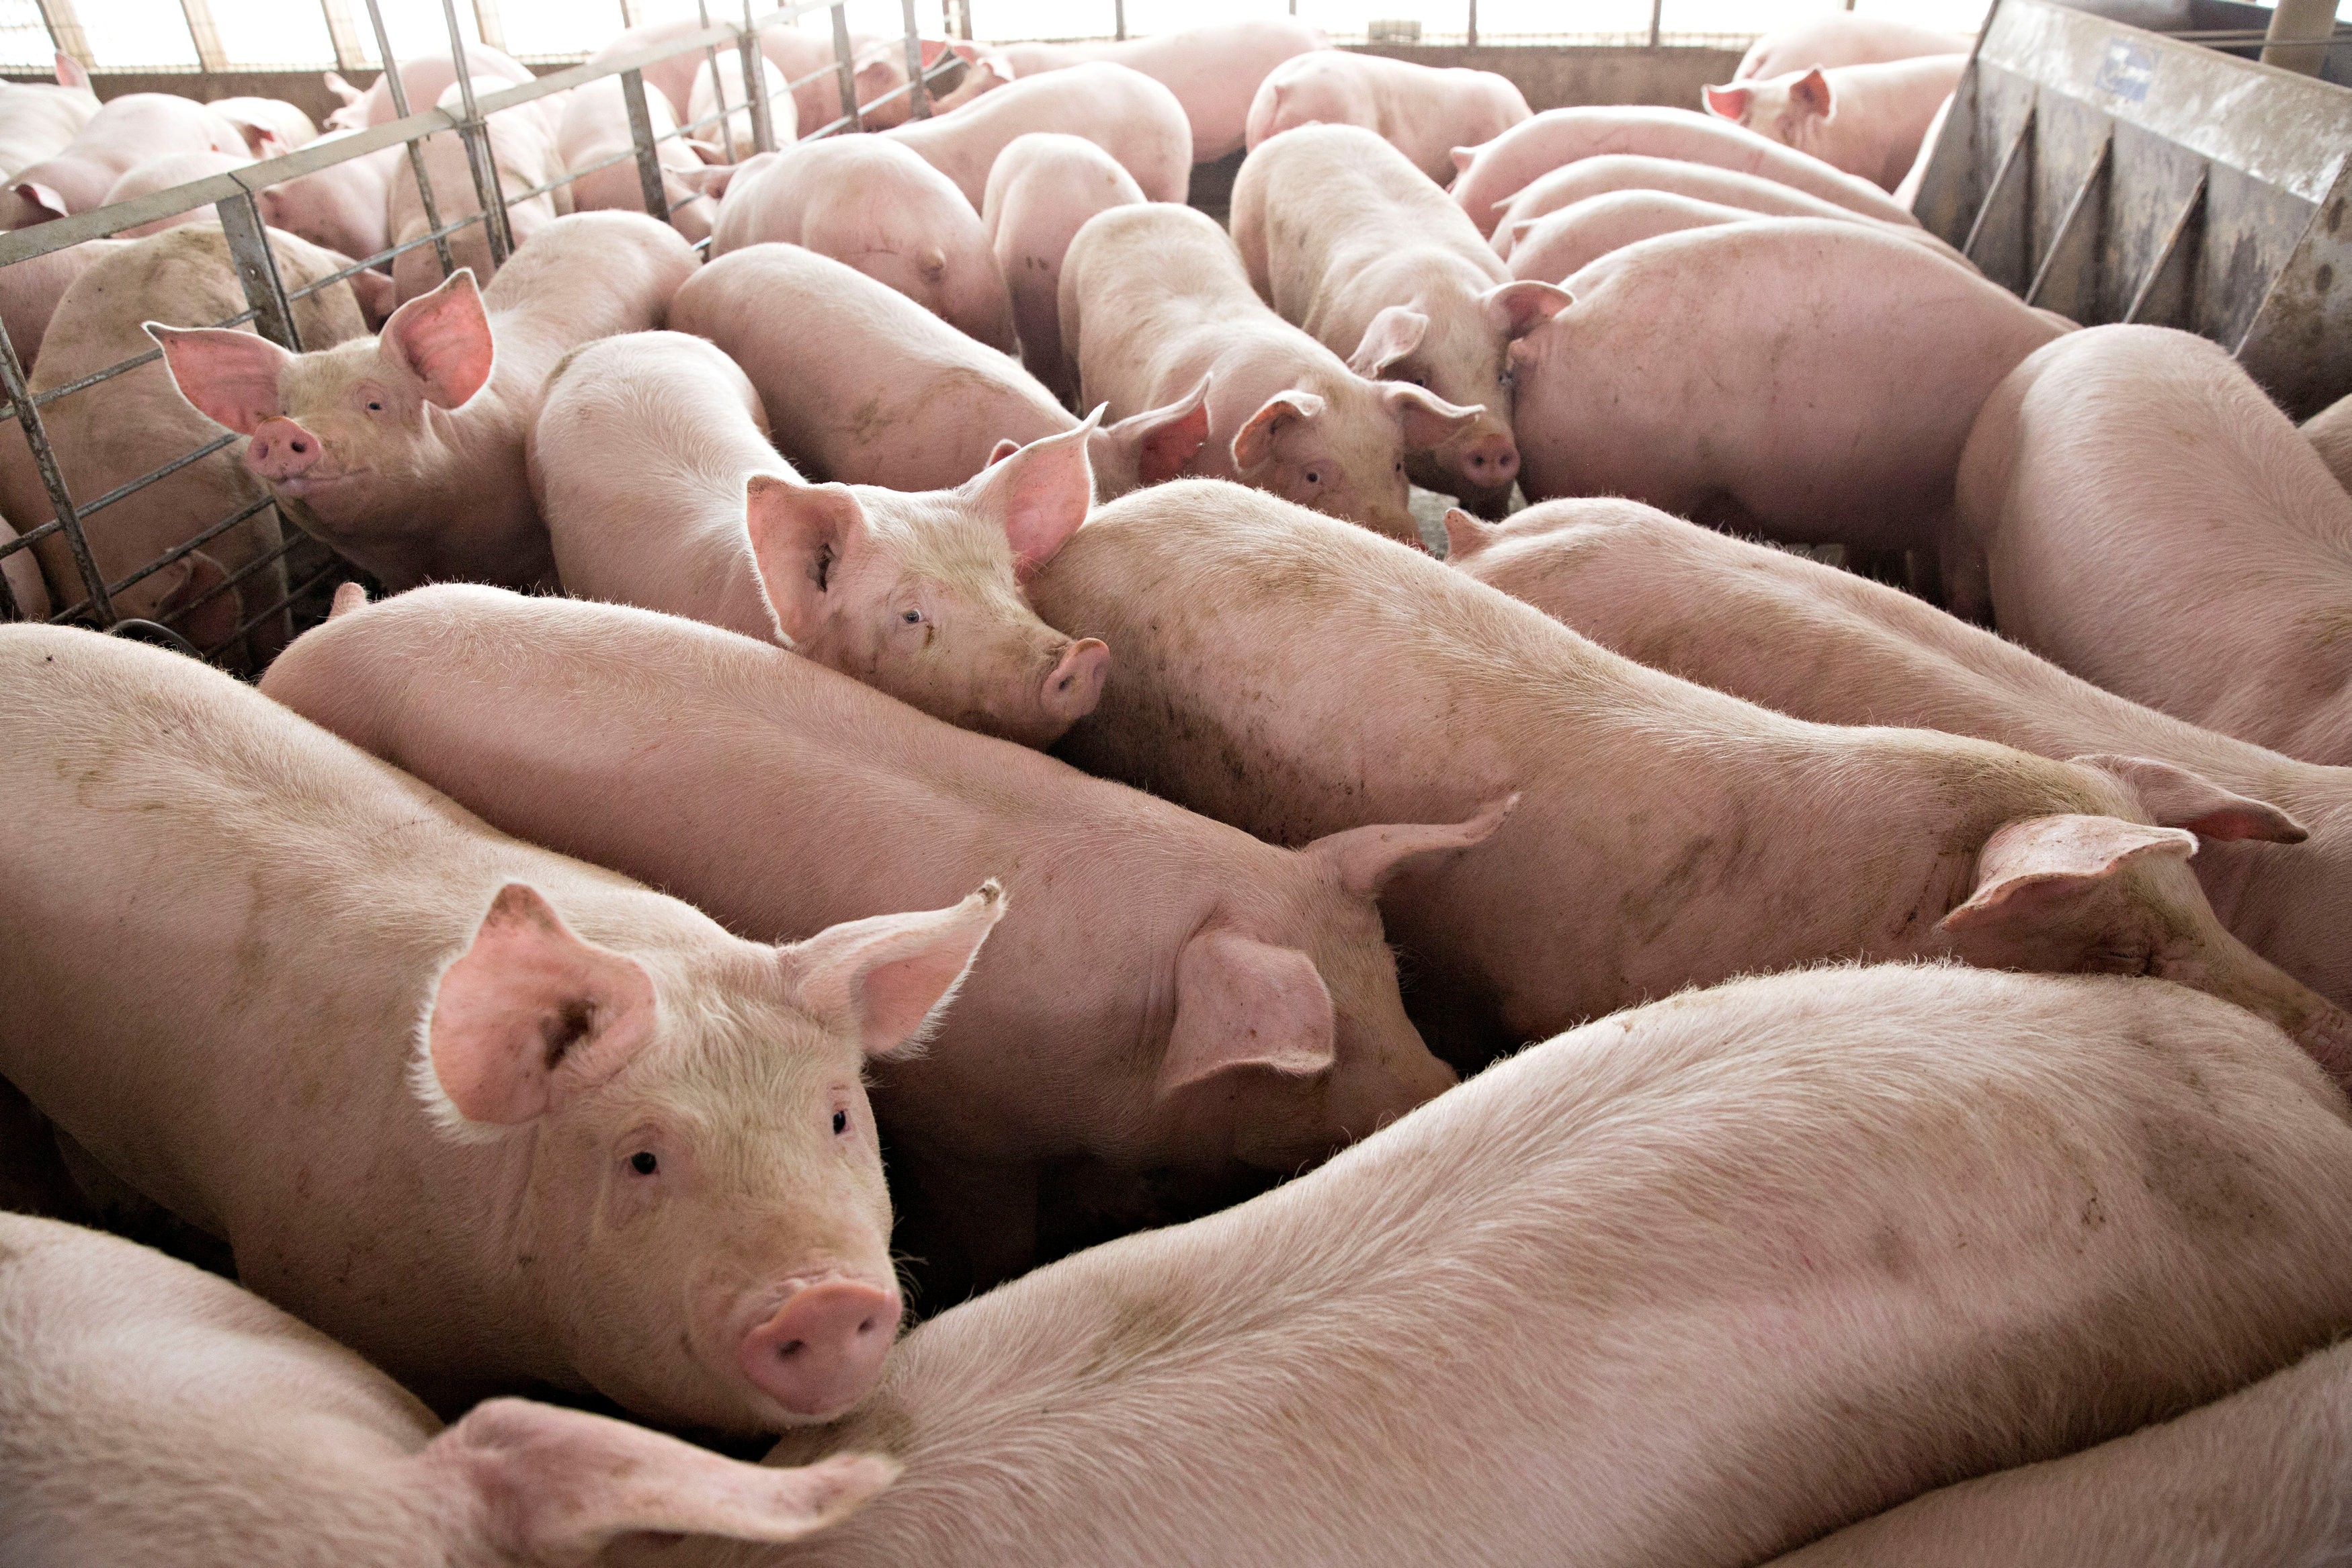 Hundreds of hogs in Liaoning province were culled to contain the epidemic. Photo: Reuters